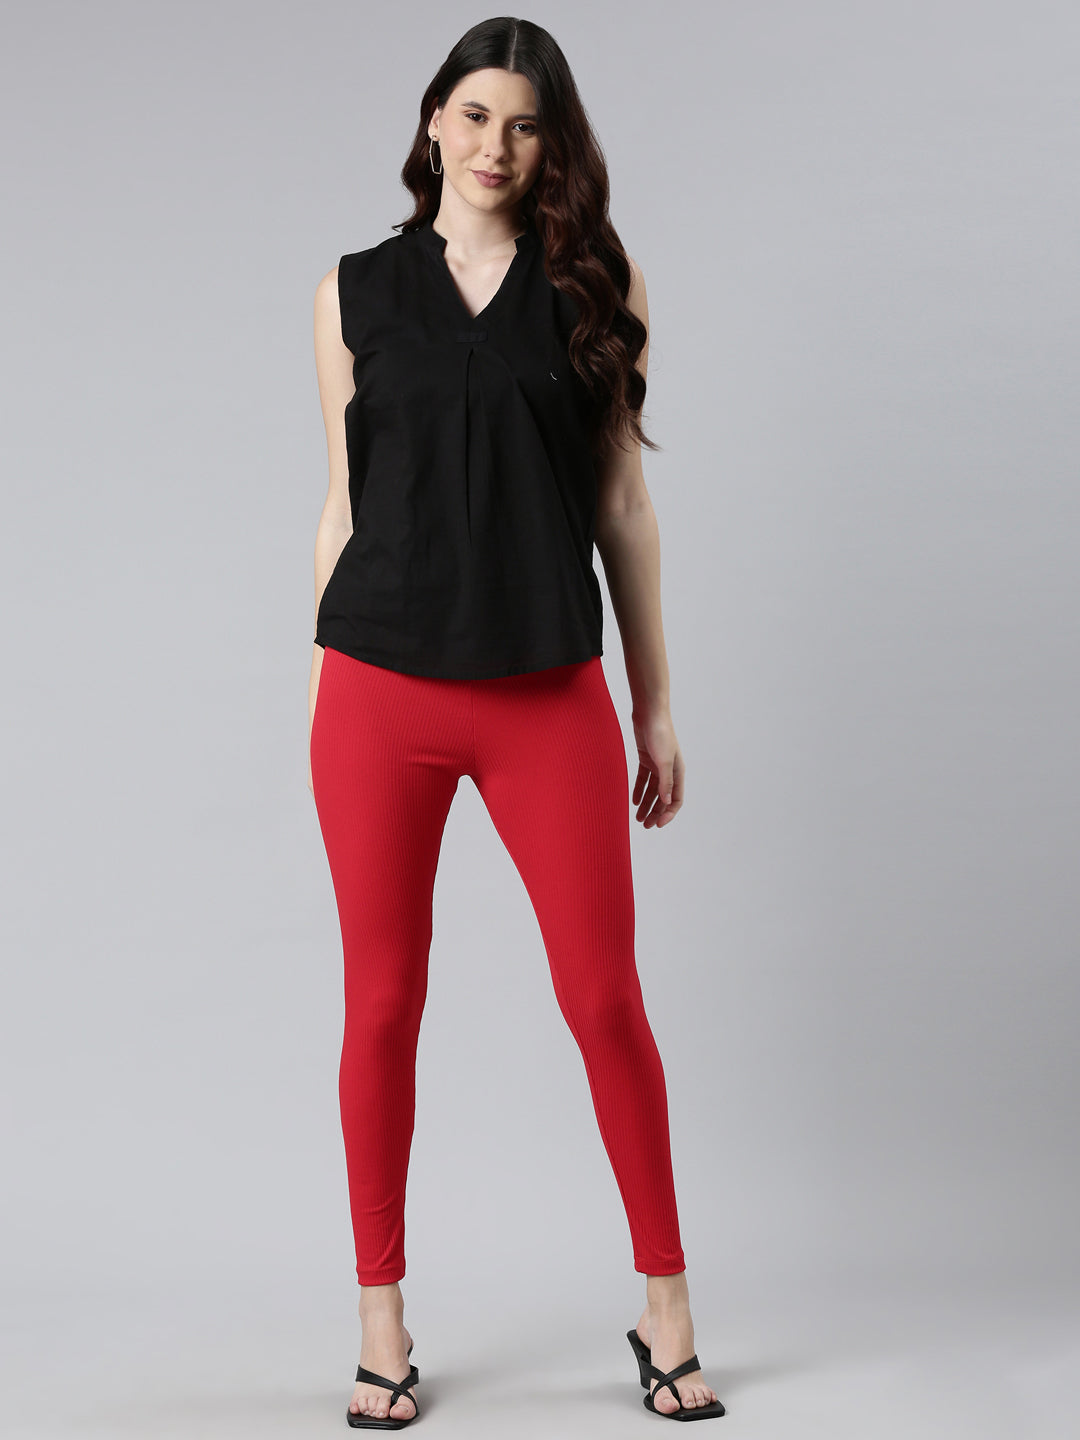 Red Gym Leggings with Pockets | Squat Proof | Pocket Sport